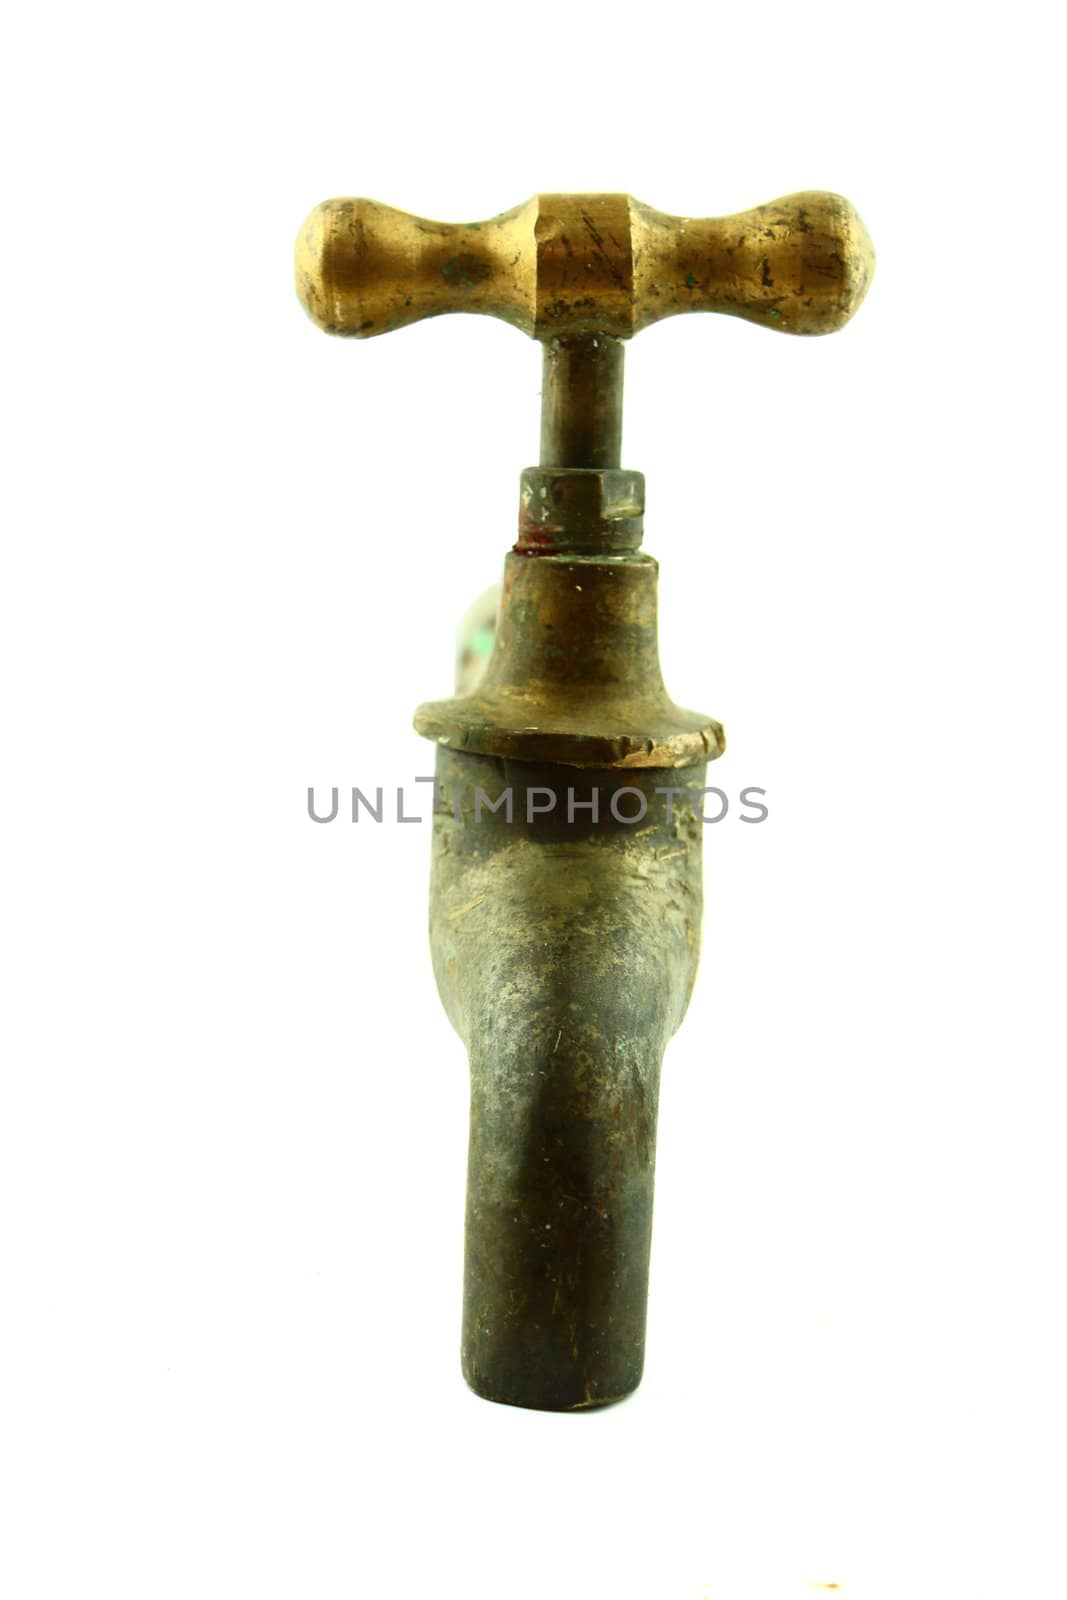 brass water tap , water tap isolated on white background with a clipping path